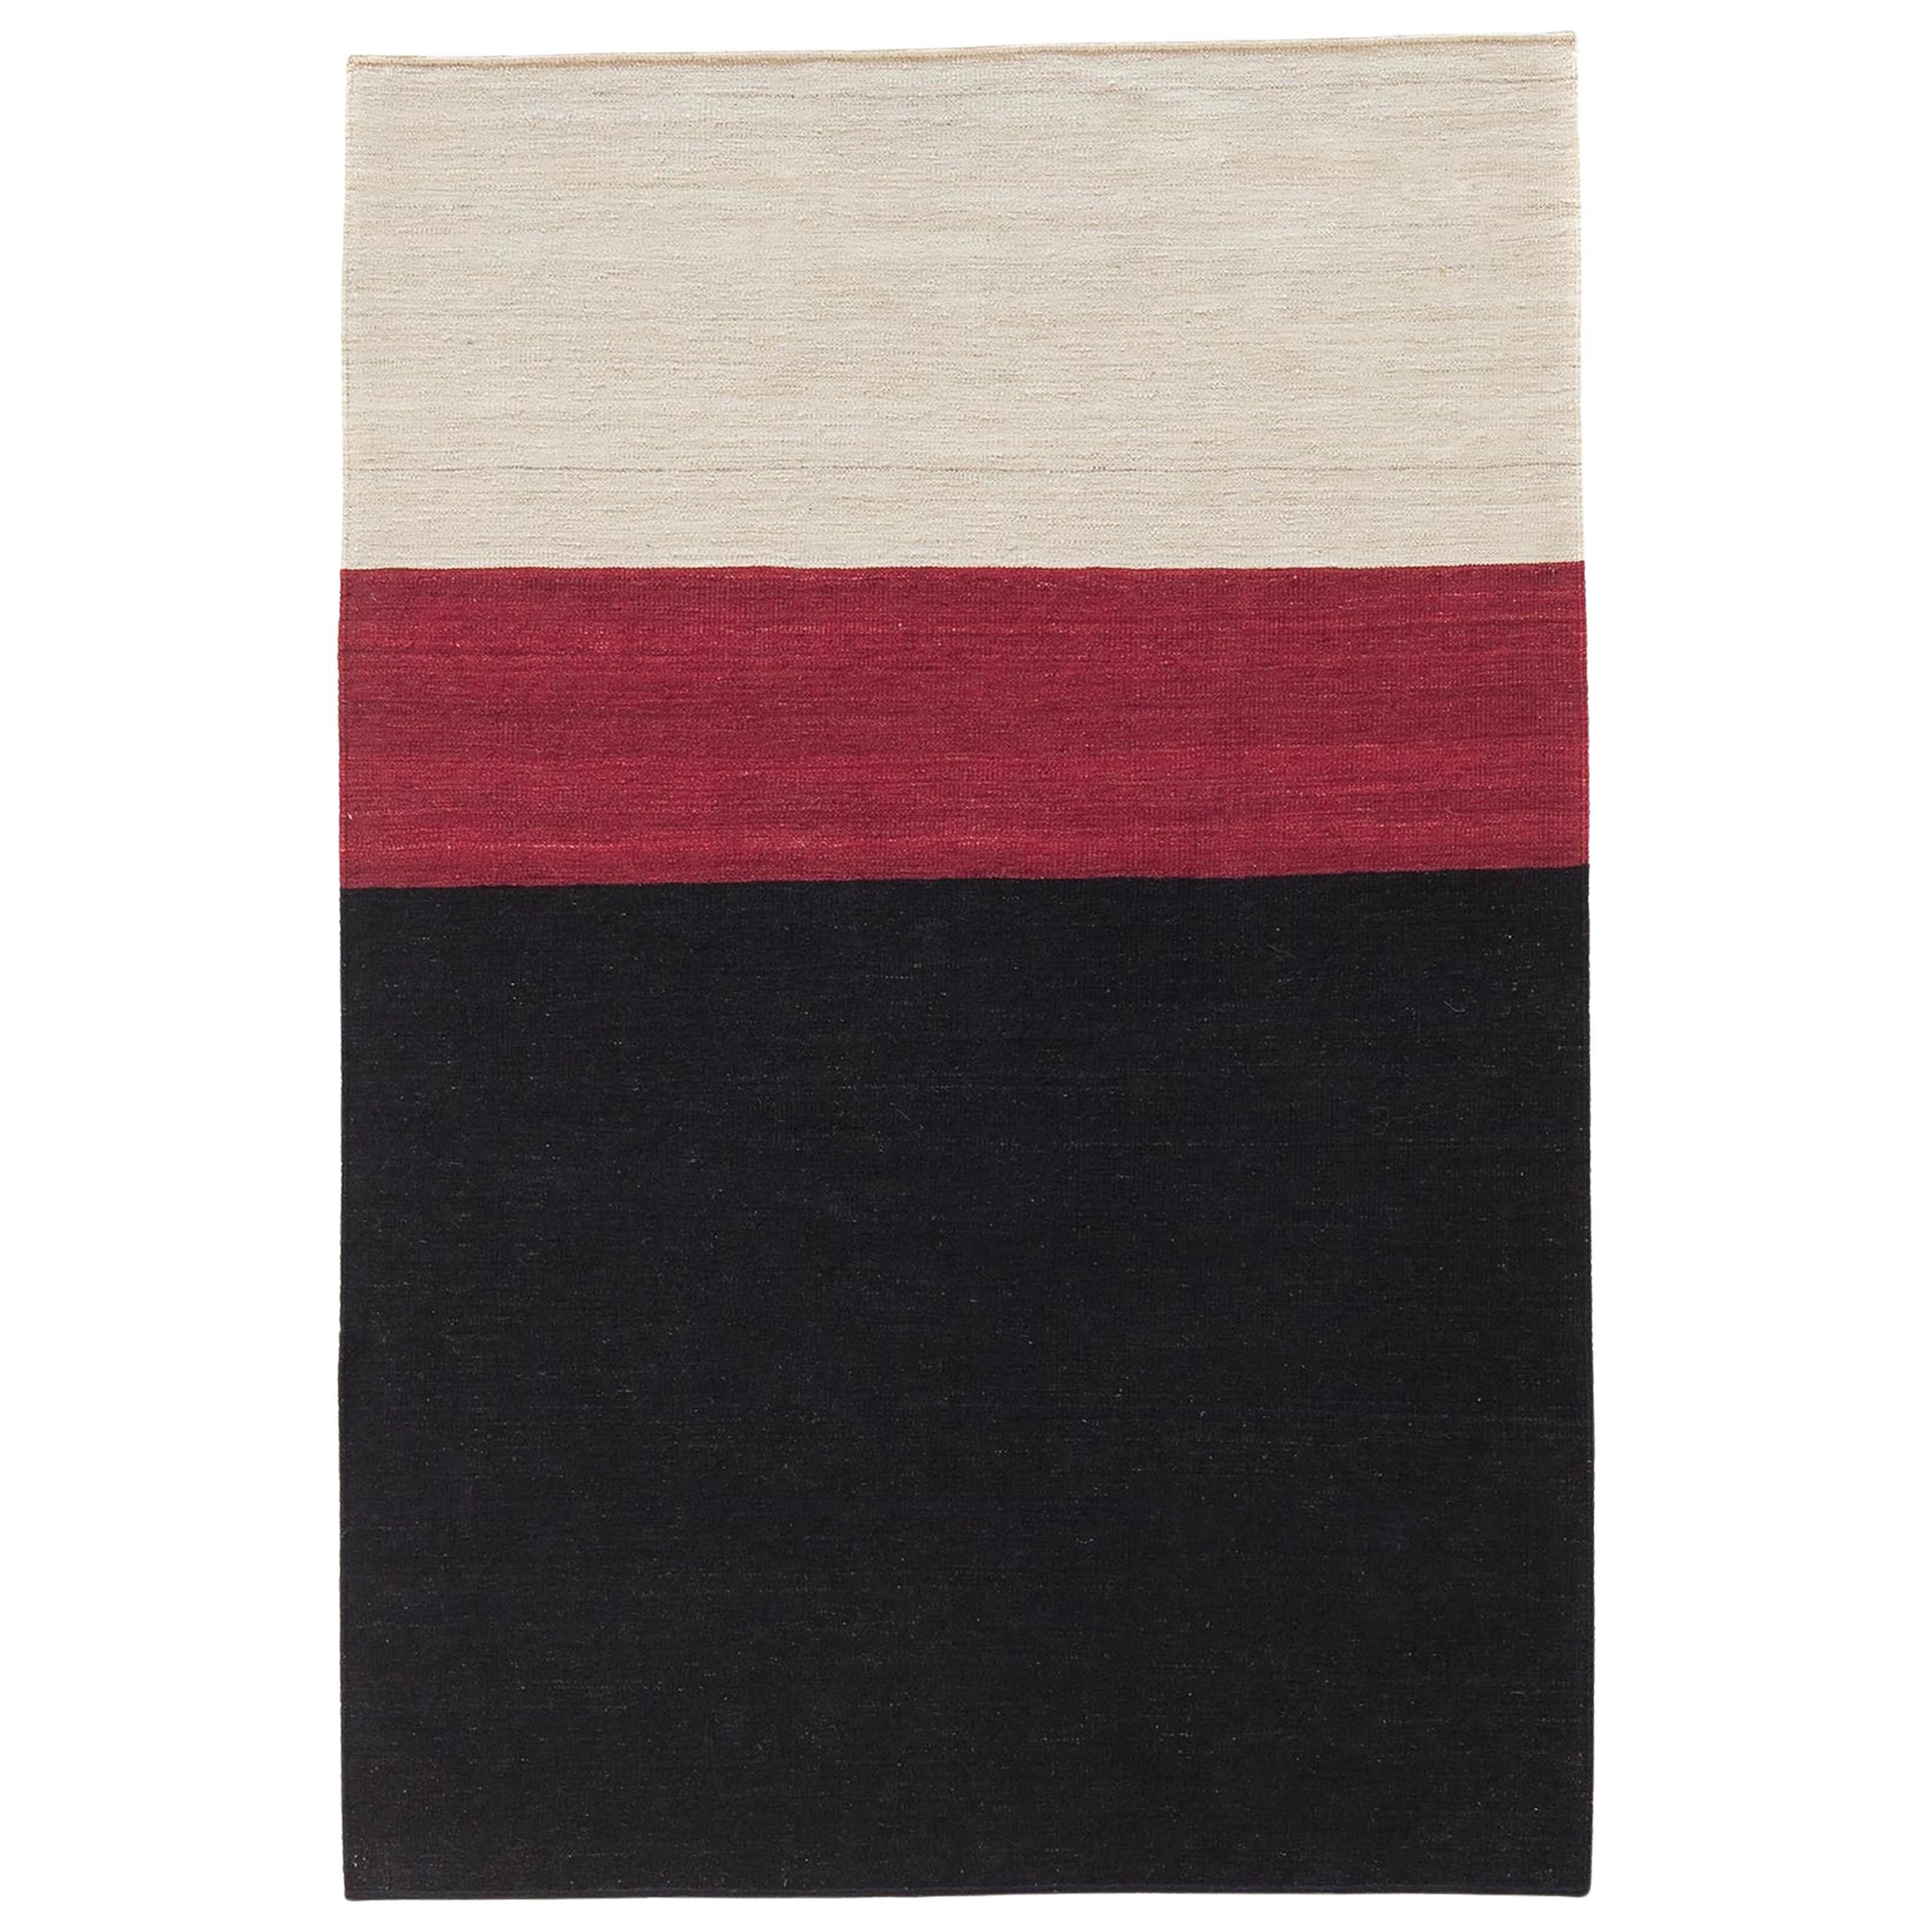 'Mélange Color 2' Hand-Loomed Rug by Sybilla for Nanimarquina For Sale